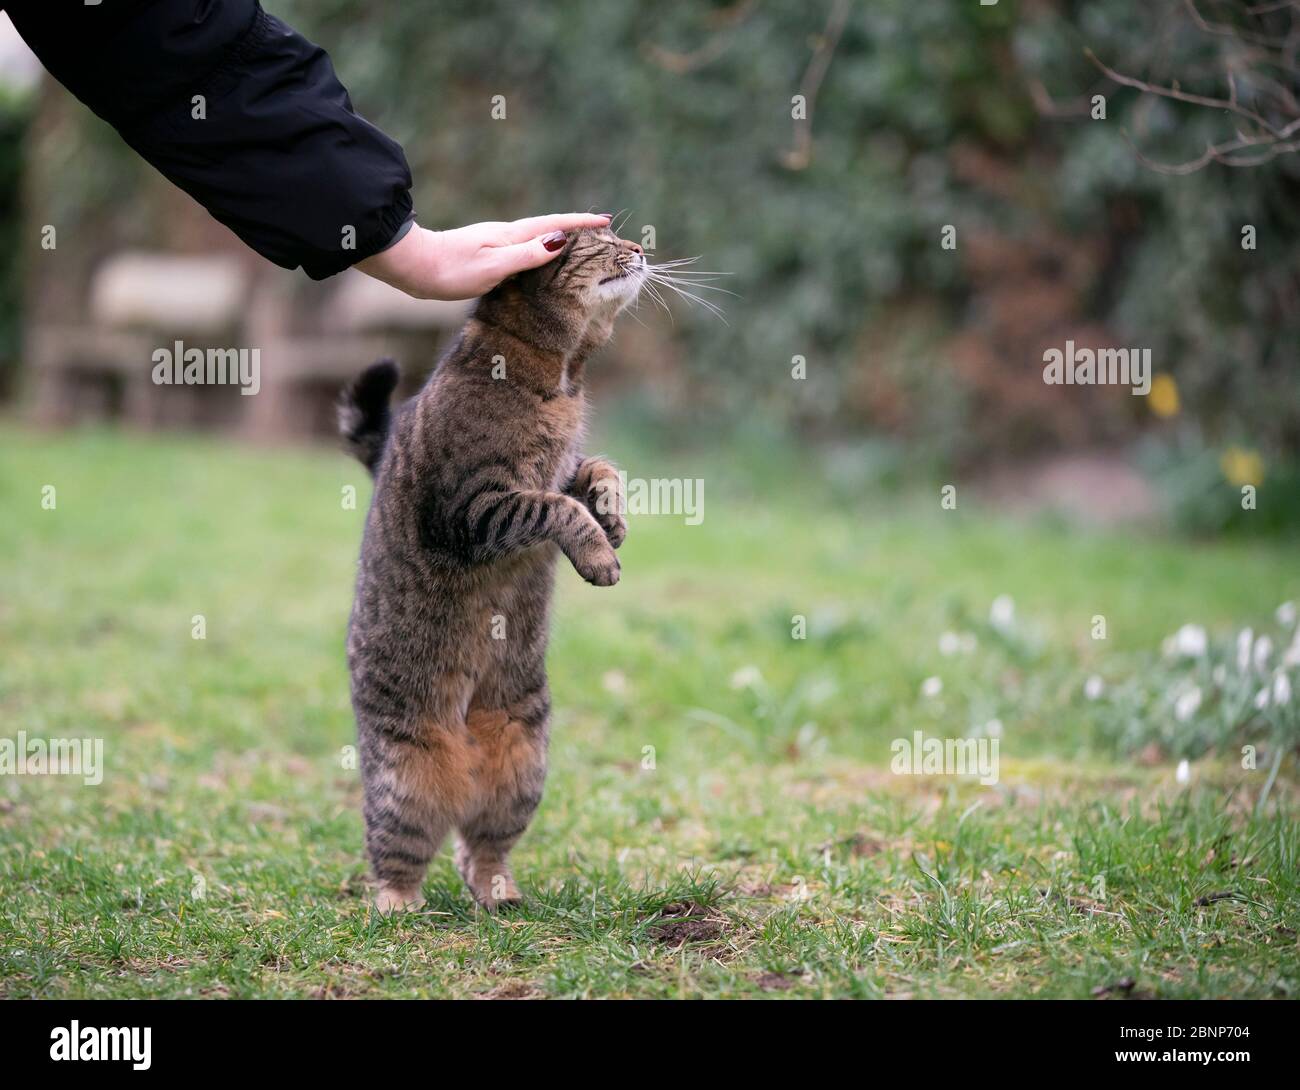 tabby cat rearing up getting stroked outdoors in garden standing on hind legs Stock Photo